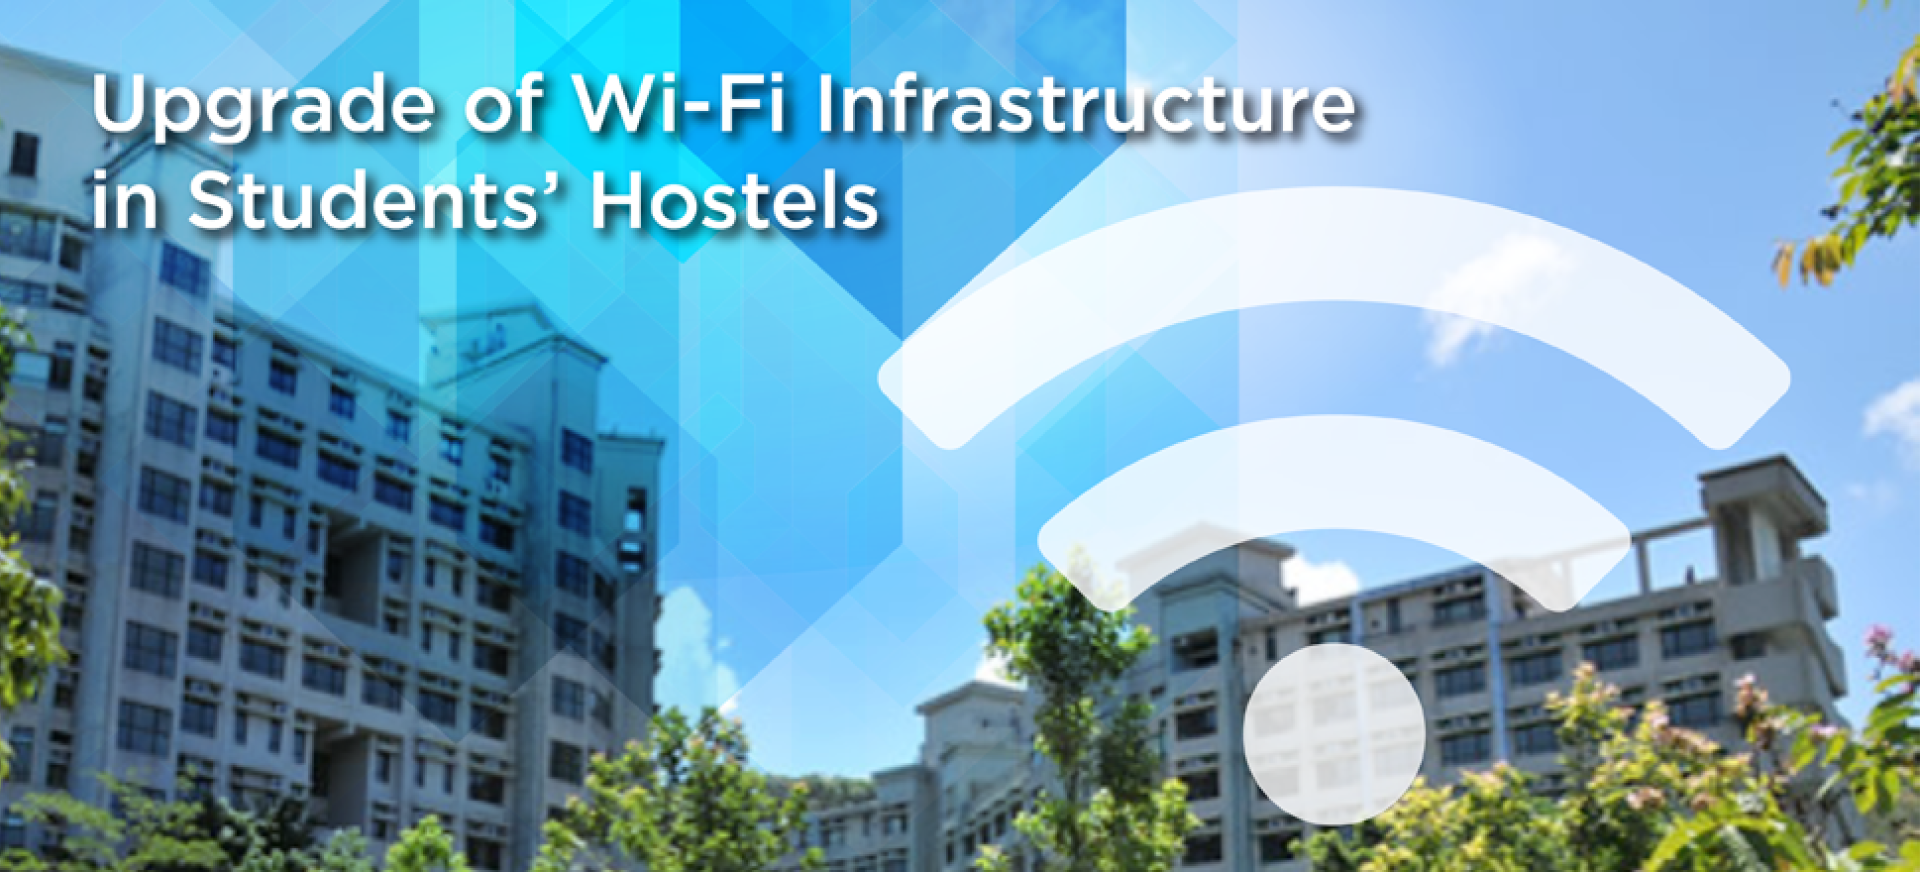 Upgrade of Wi-Fi Infrastructure in Students’ Hostels